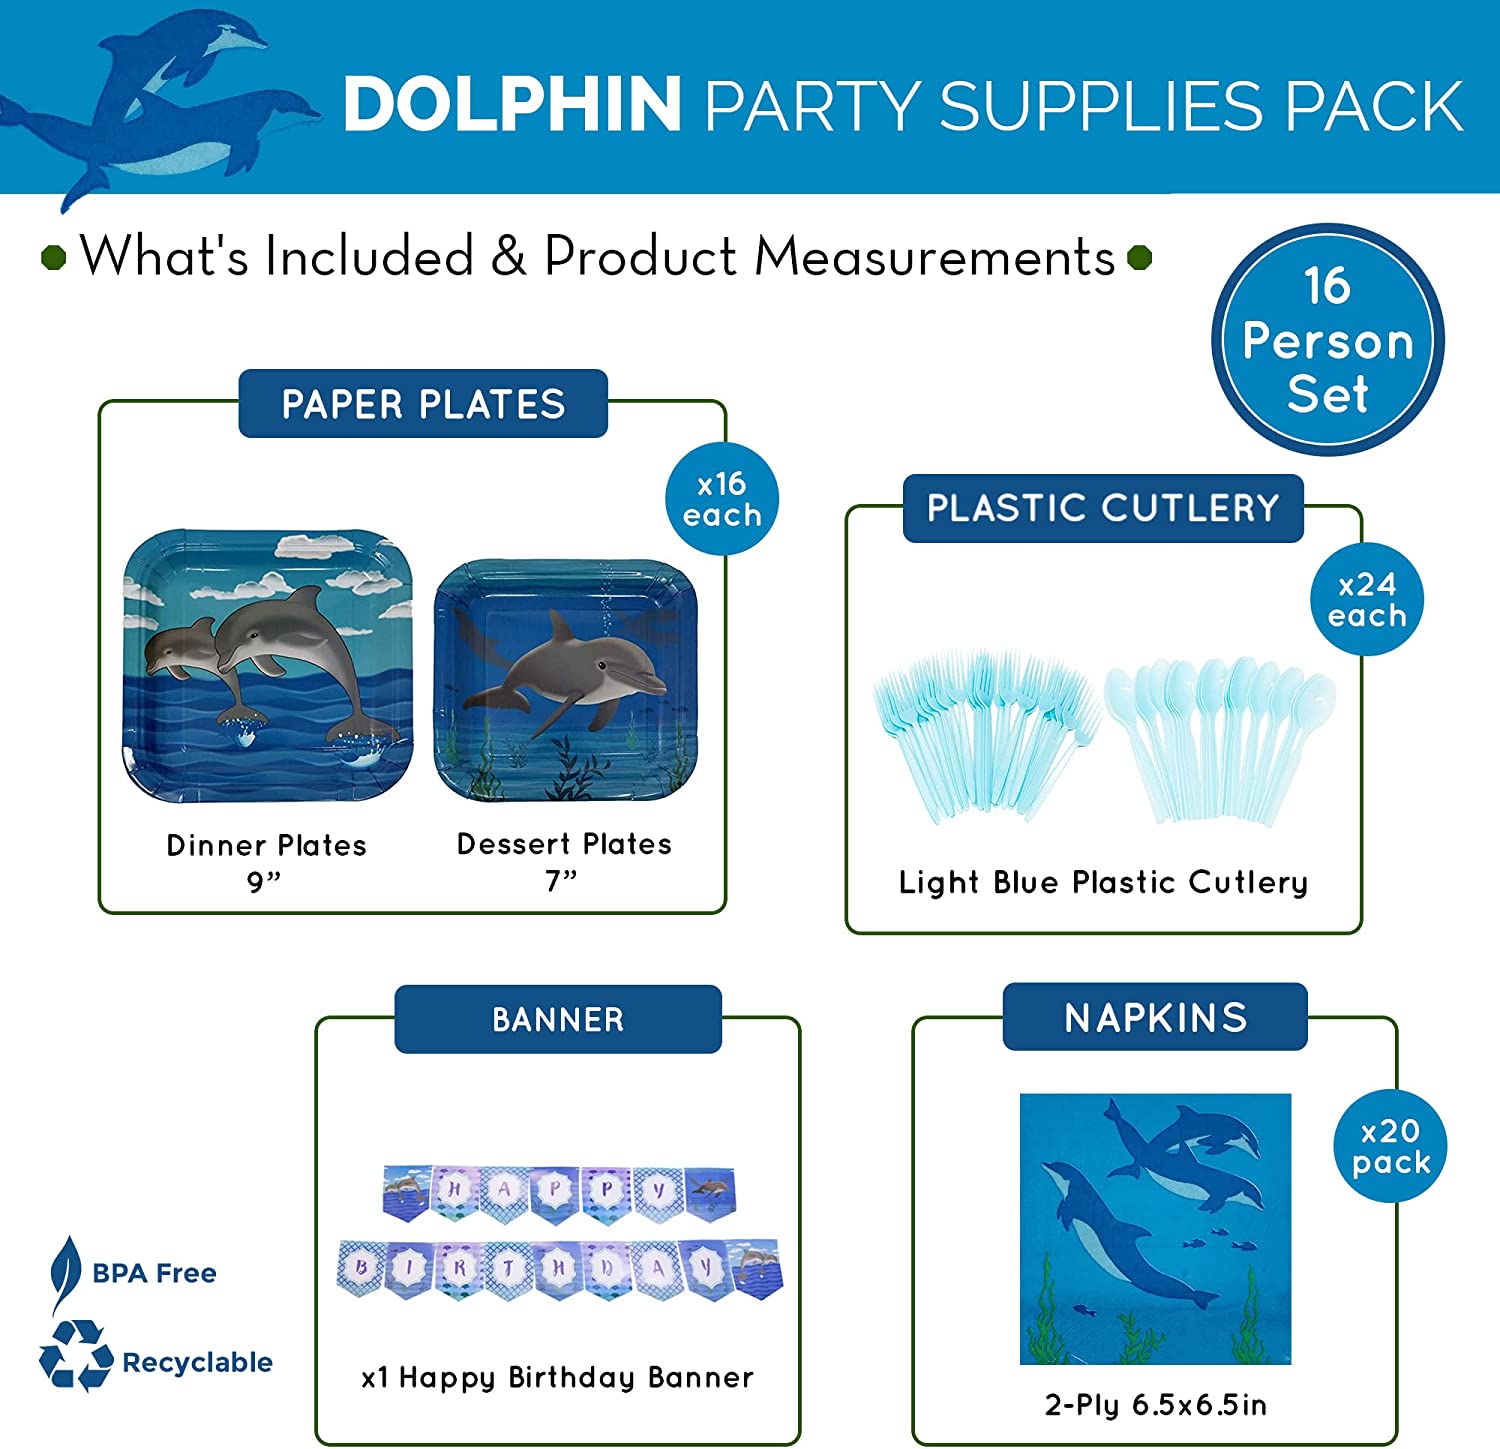 Dolphin Party Pack -  16pcs 9-inch paper dinner plates, 16pcs 7-inch paper dessert plates, 20pcs paper lunch napkins, 1pc Banner, 24pcs light blue plastic forks, and 24pcs light blue plastic spoons